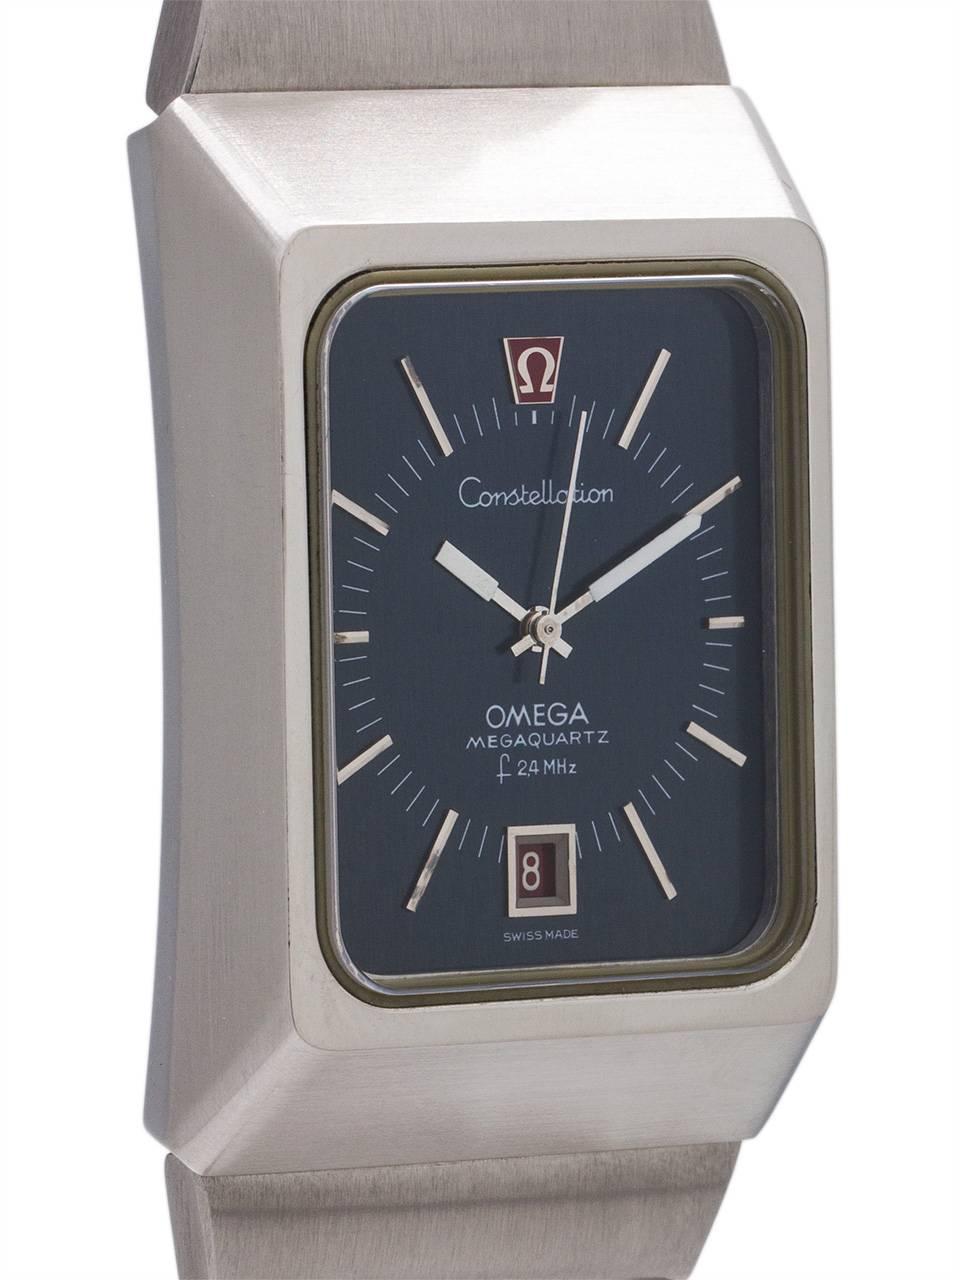 
Scarce and exceptional condition example circa 1970’s Omega Constellation Megaquartz 2.4MHz. Featuring a massive 32 x 49mm case 12mm deep with large metallic blue dial analog display with date window and “dead” sweep seconds hands. Massive vertical